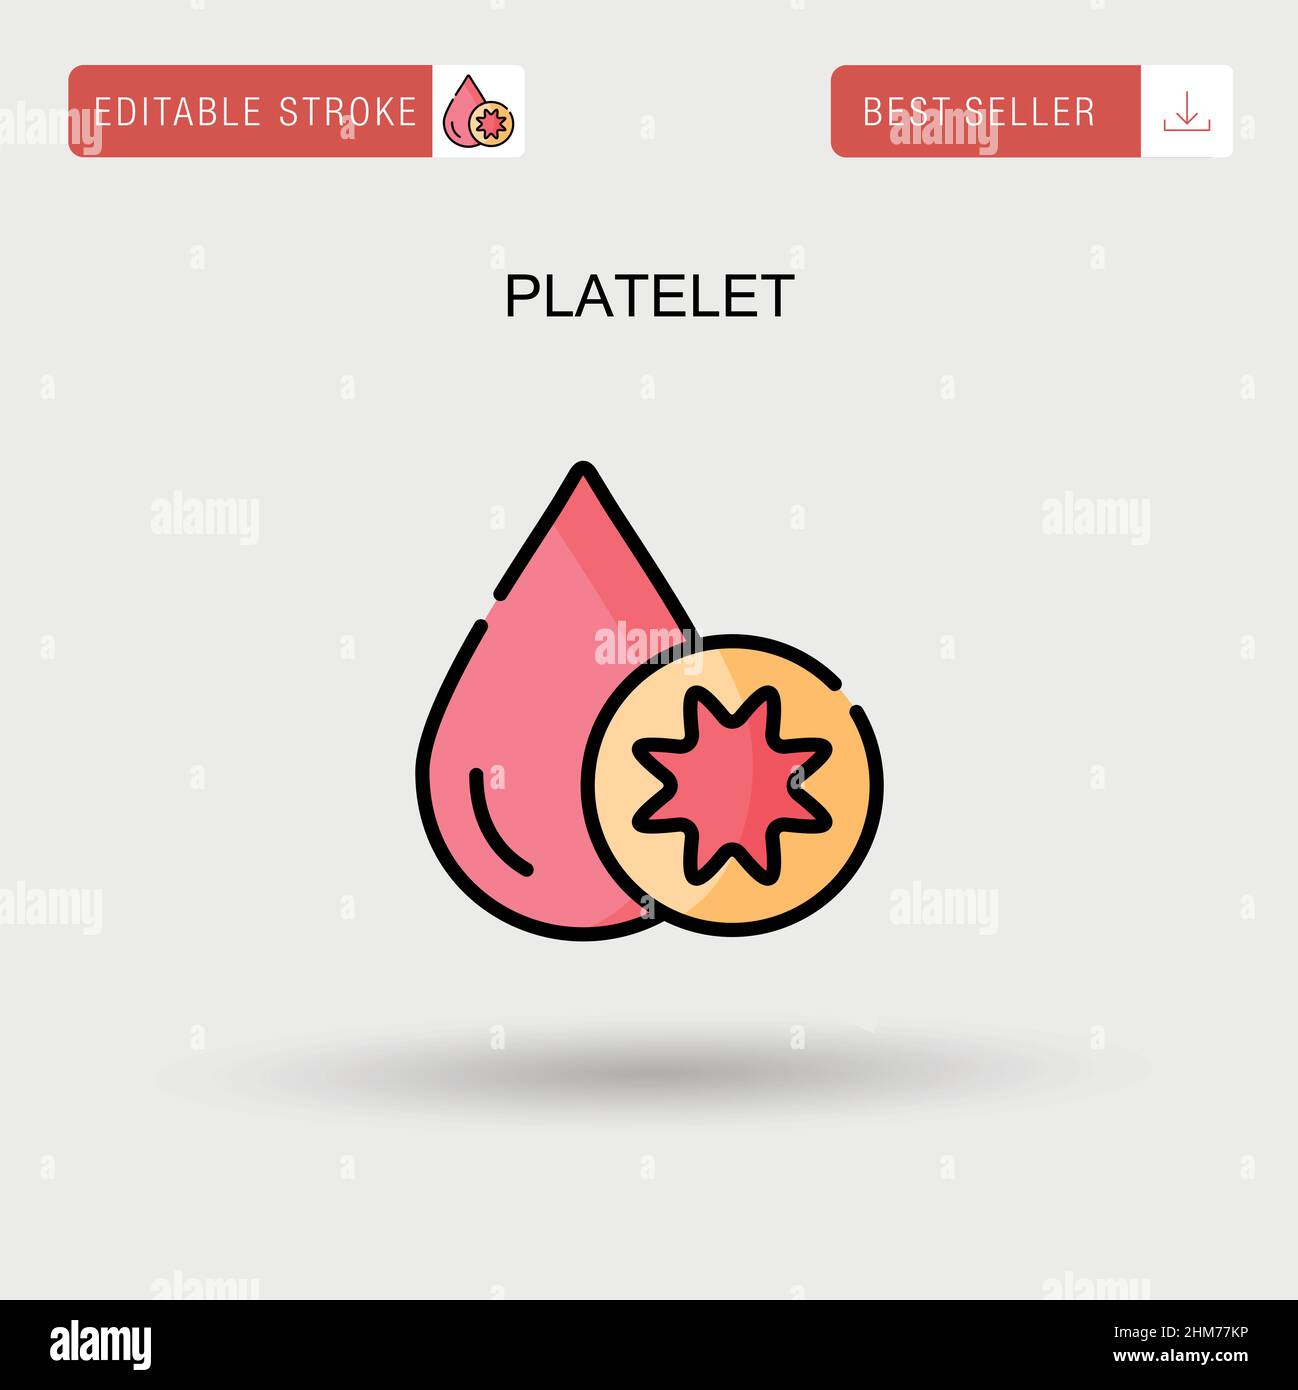 Platelet Simple vector icon. Stock Vector